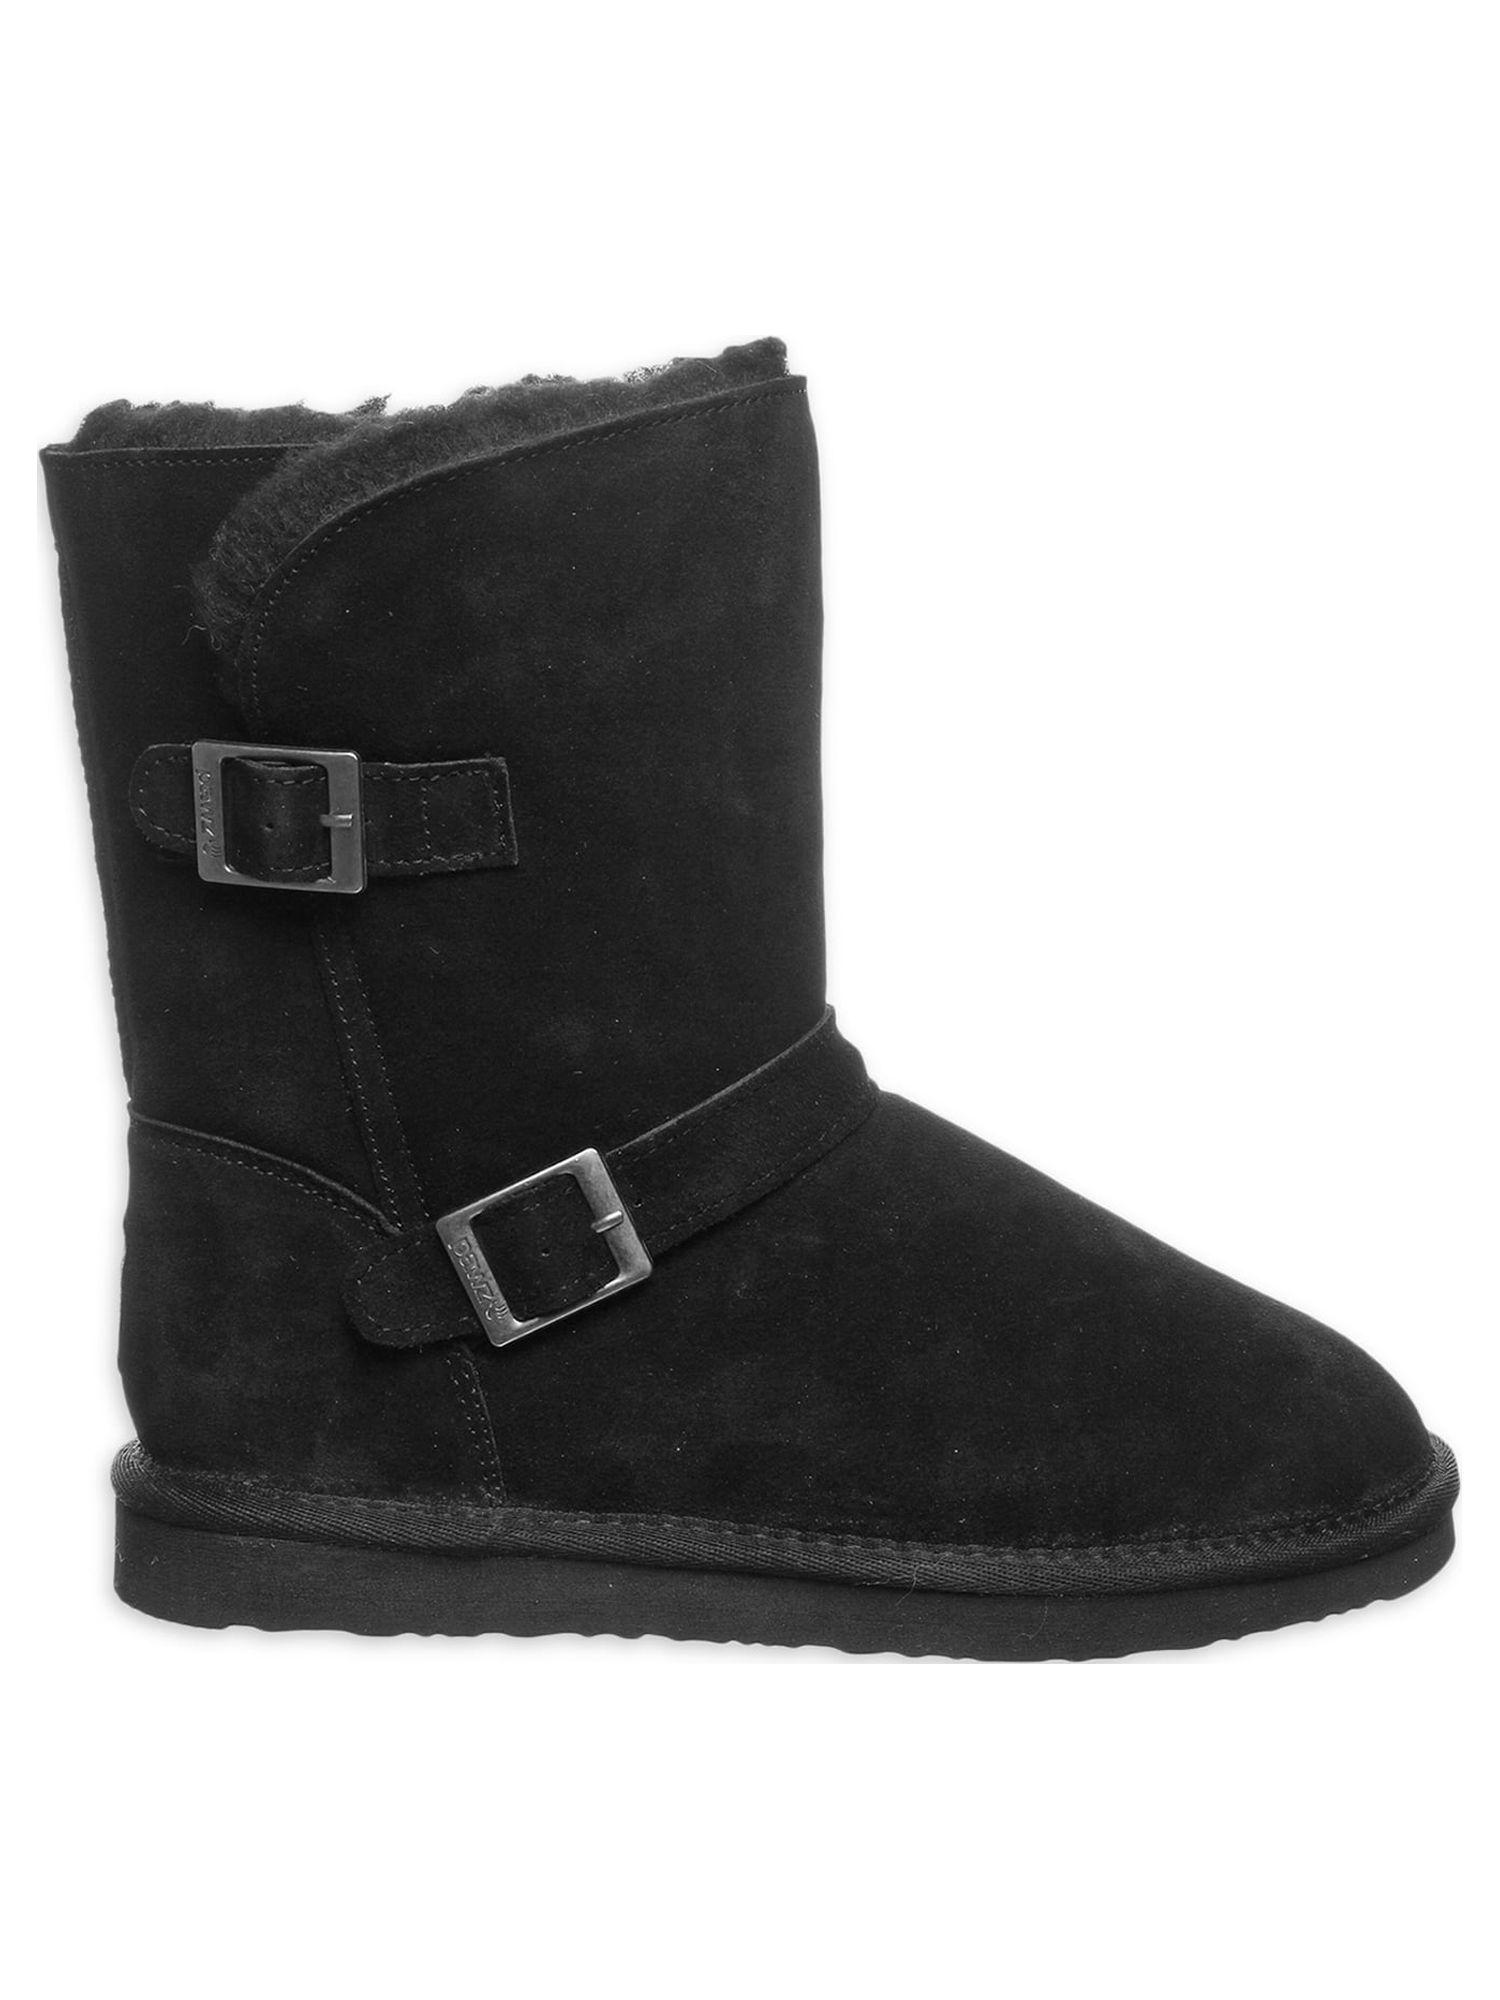 Pawz by Bearpaw Womens Camille Faux Fur Lined Suede Boot - image 2 of 5